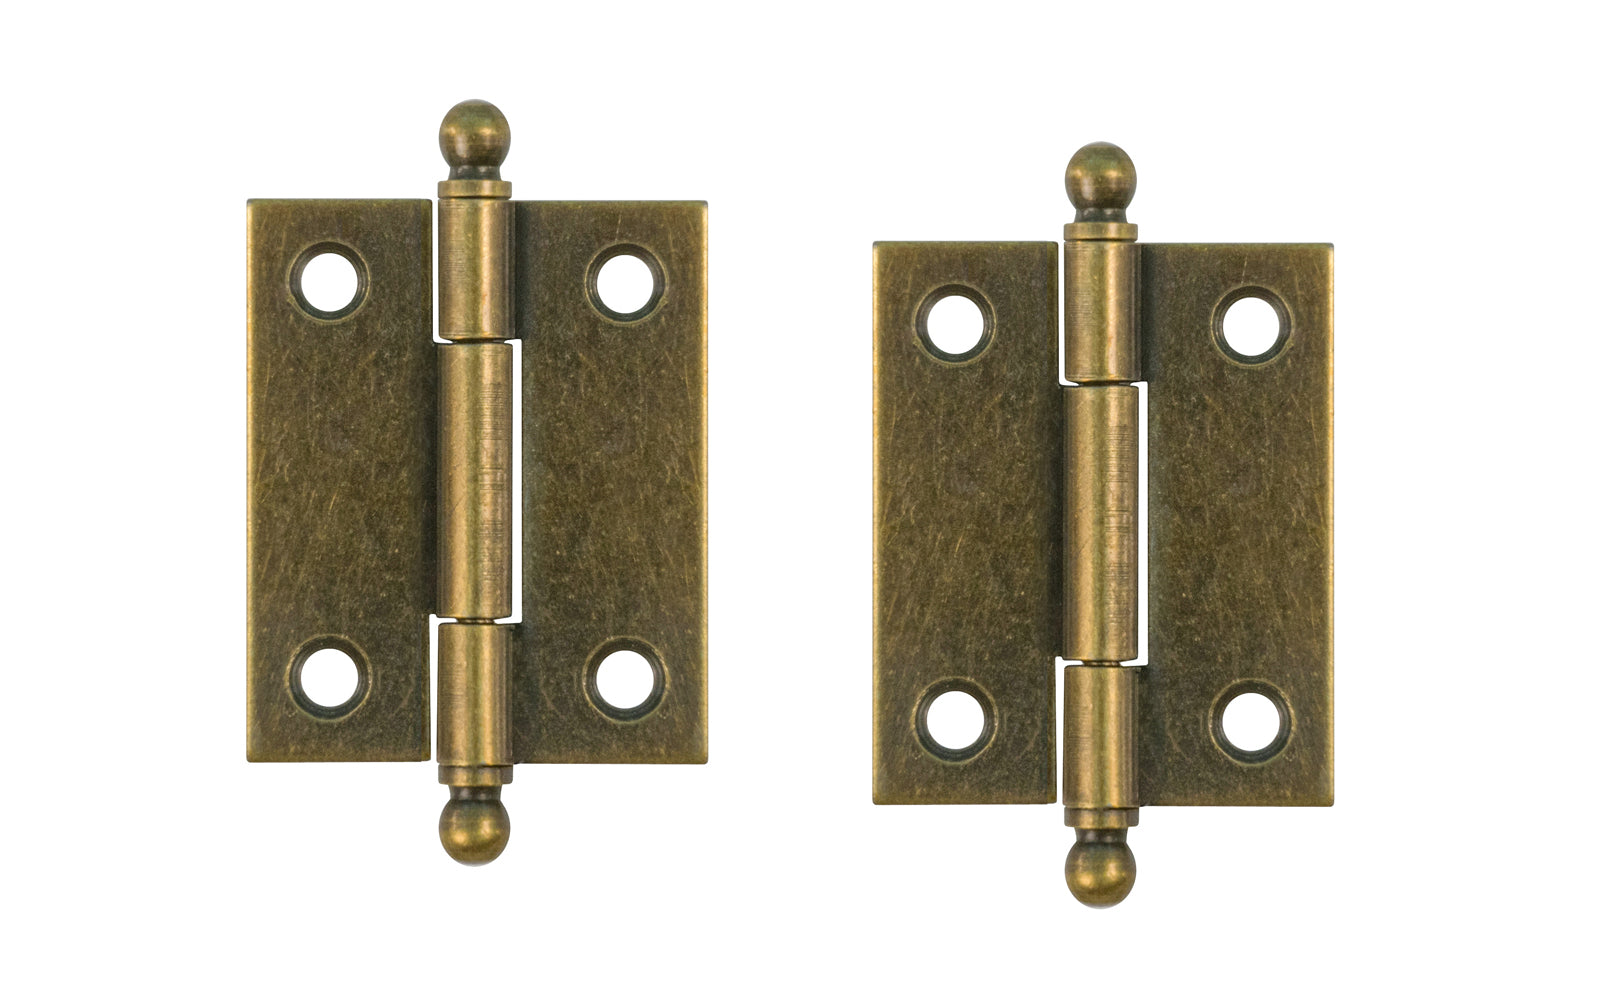 1-1/2 x 1-1/4 Small Broad Hinges - Multiple Finishes Available